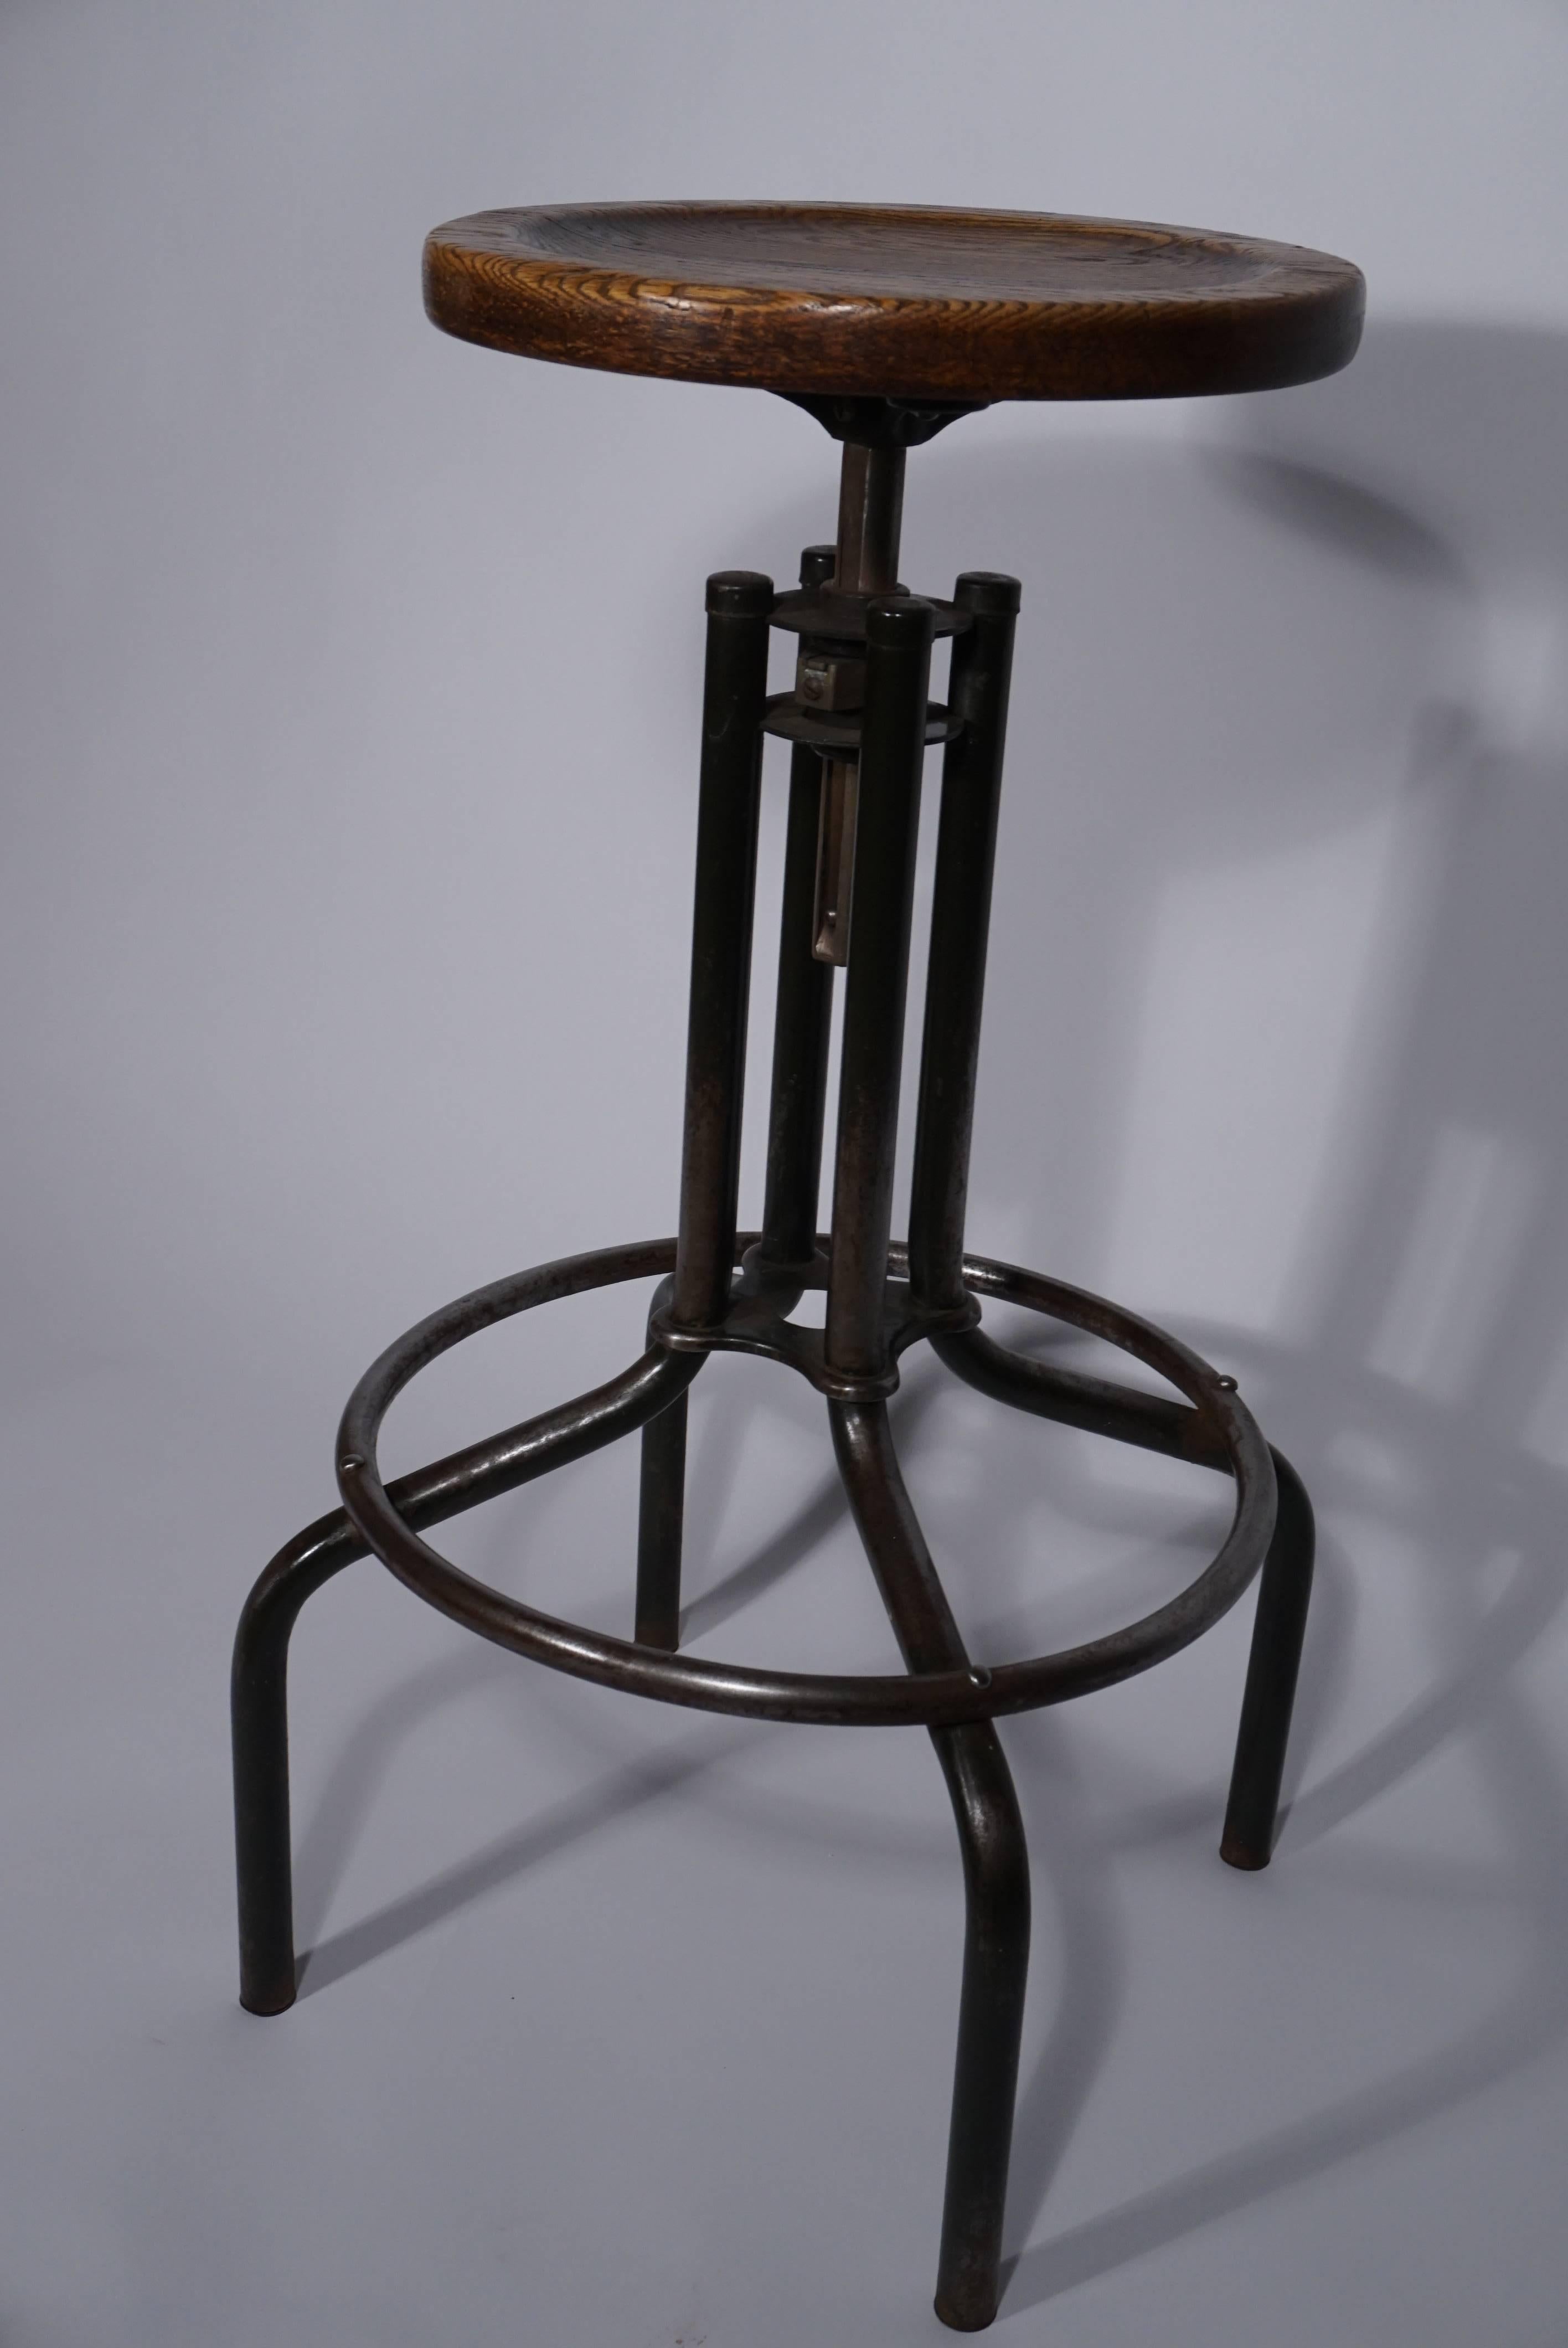 Industrial stool with adjustable oak seat. Seat heights adjust from 30 inches to 35 inches.